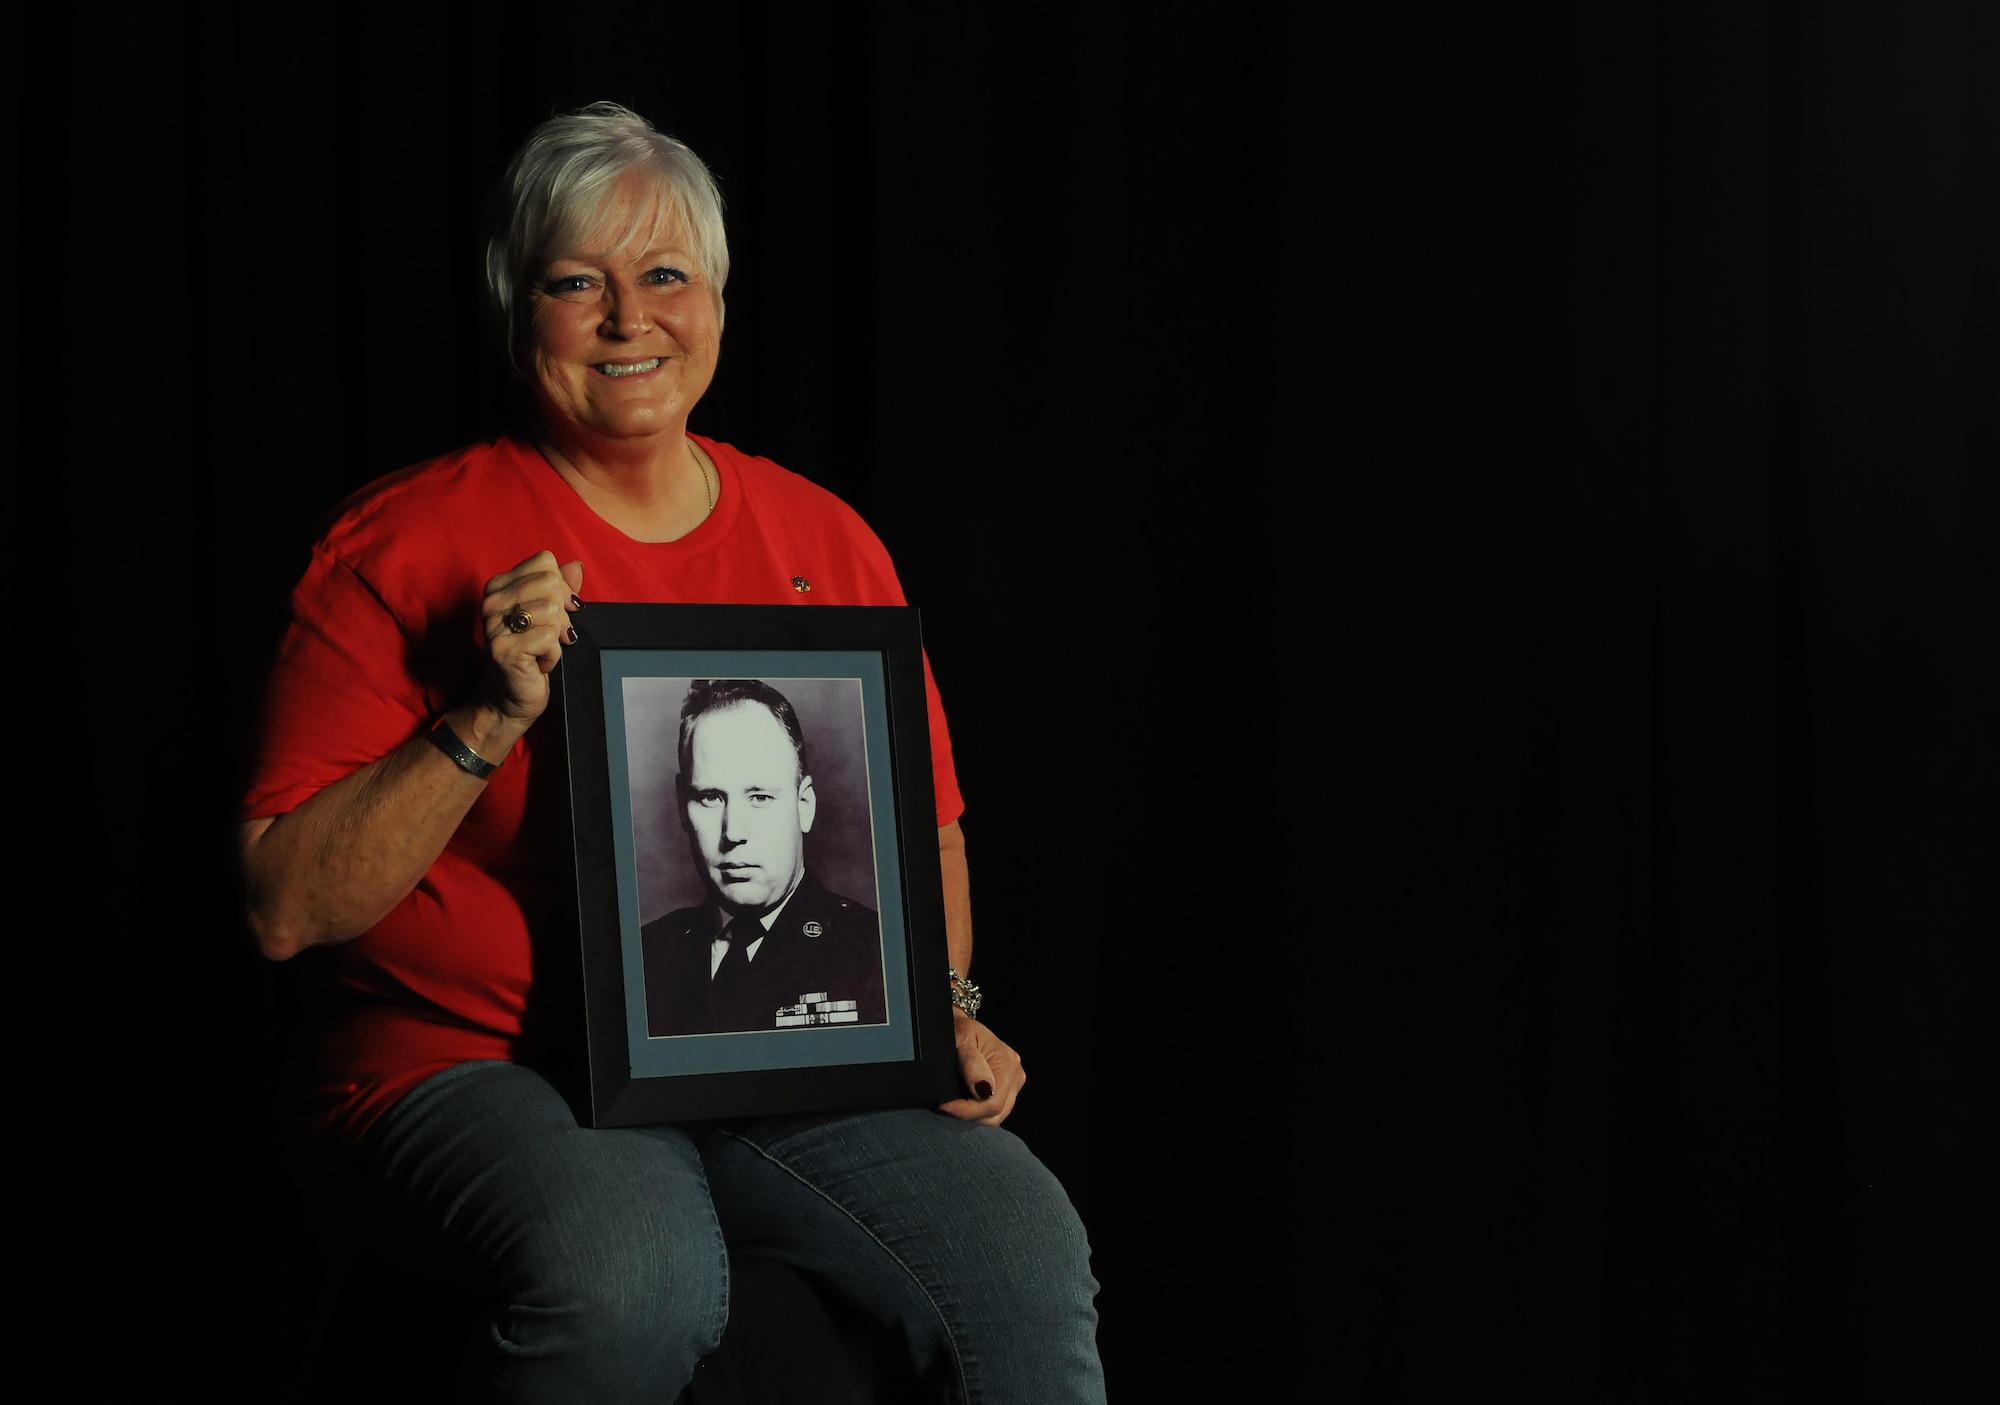 Nora Moore, daughter of Chief Master Sgt. Thomas Moore, Vietnam War prisoner of war and missing in action, holds a photo of her dad, Sept. 22, 2017, on Keesler Air Force Base, Mississippi. Thomas Moore was captured in South Vietnam by the Viet Cong and has been listed as a POW/MIA due to his remains not being found. Nora, was recently recognized as the first person in Keesler history to receive Gold Star Family status. (U.S. Air Force photo by Senior Airman Holly Mansfield)